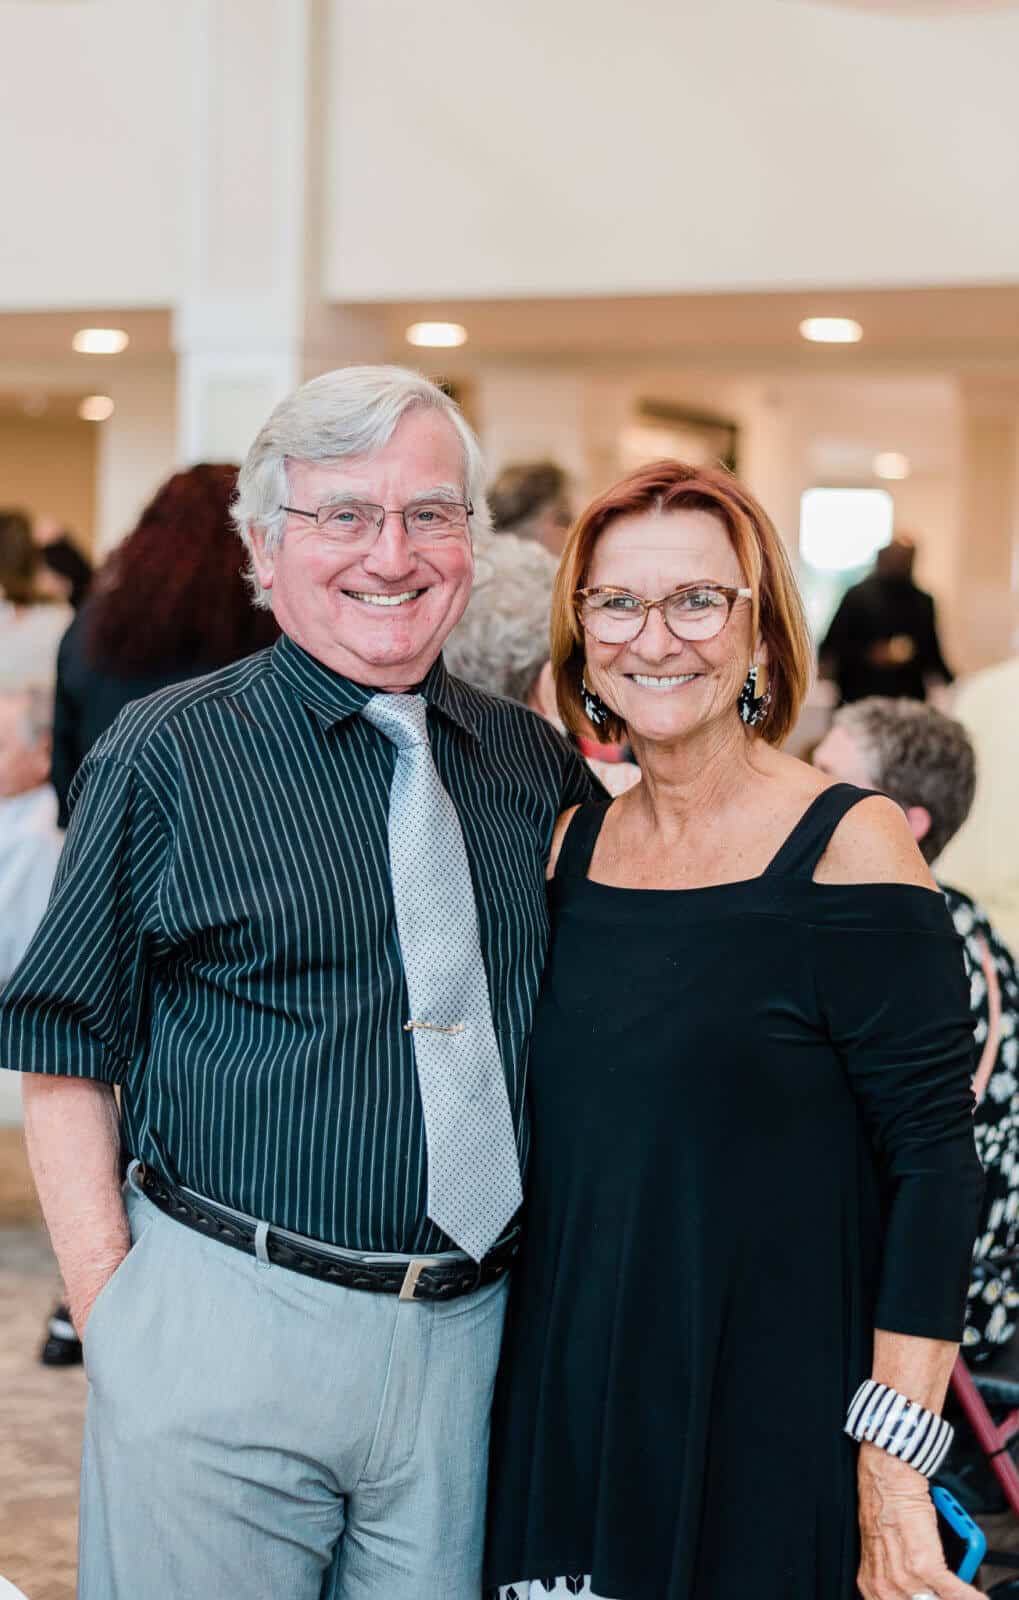 Couple smiling at event